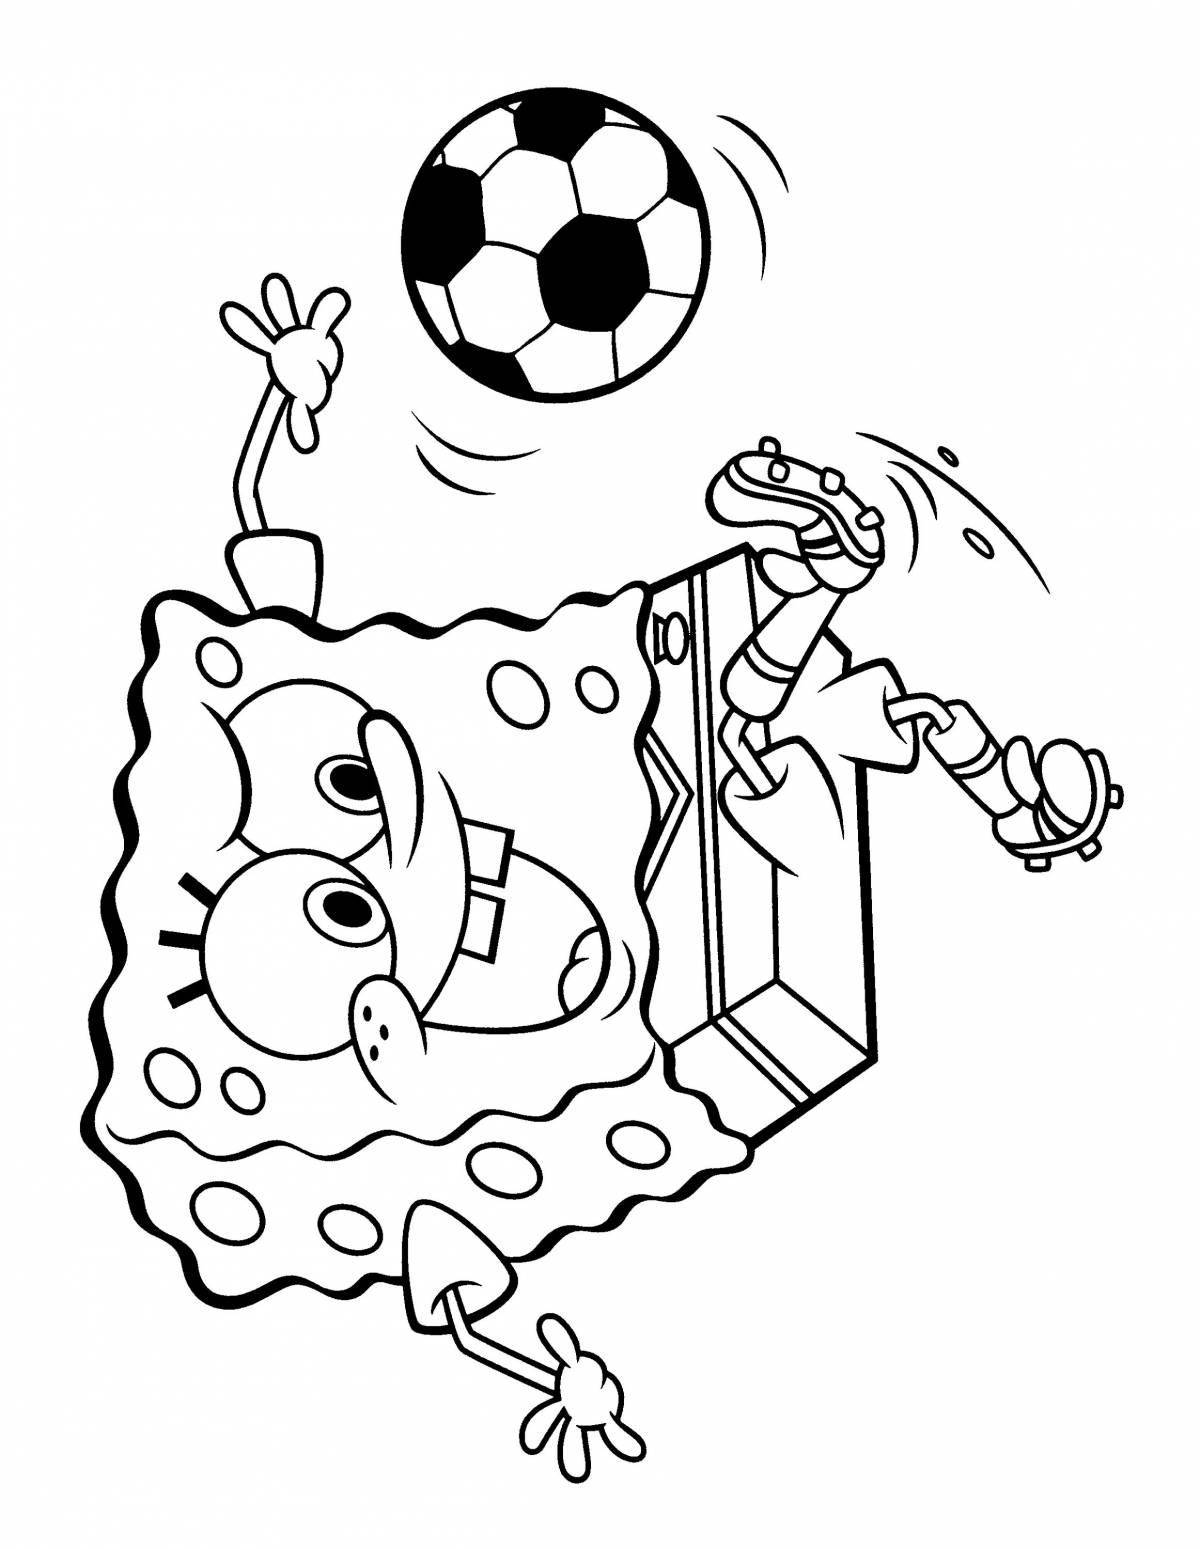 Incredible soccer ball coloring book for kids